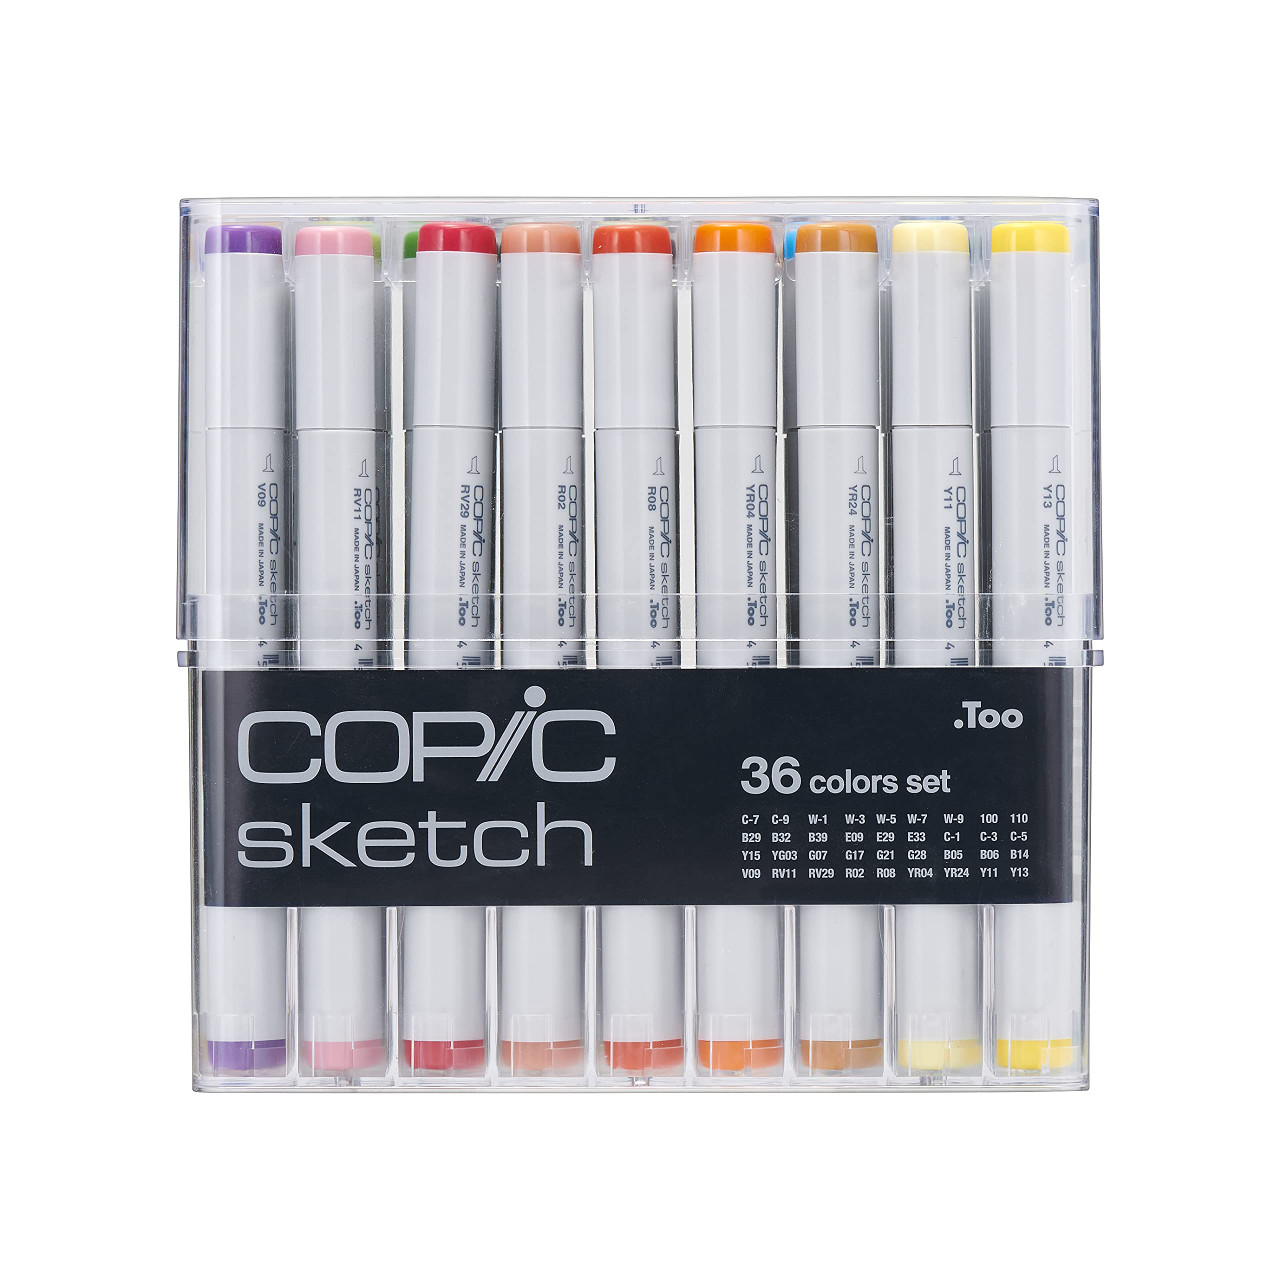 Copic Sketch Alcohol-Based Markers, 36pc Set - Artist & Craftsman Supply